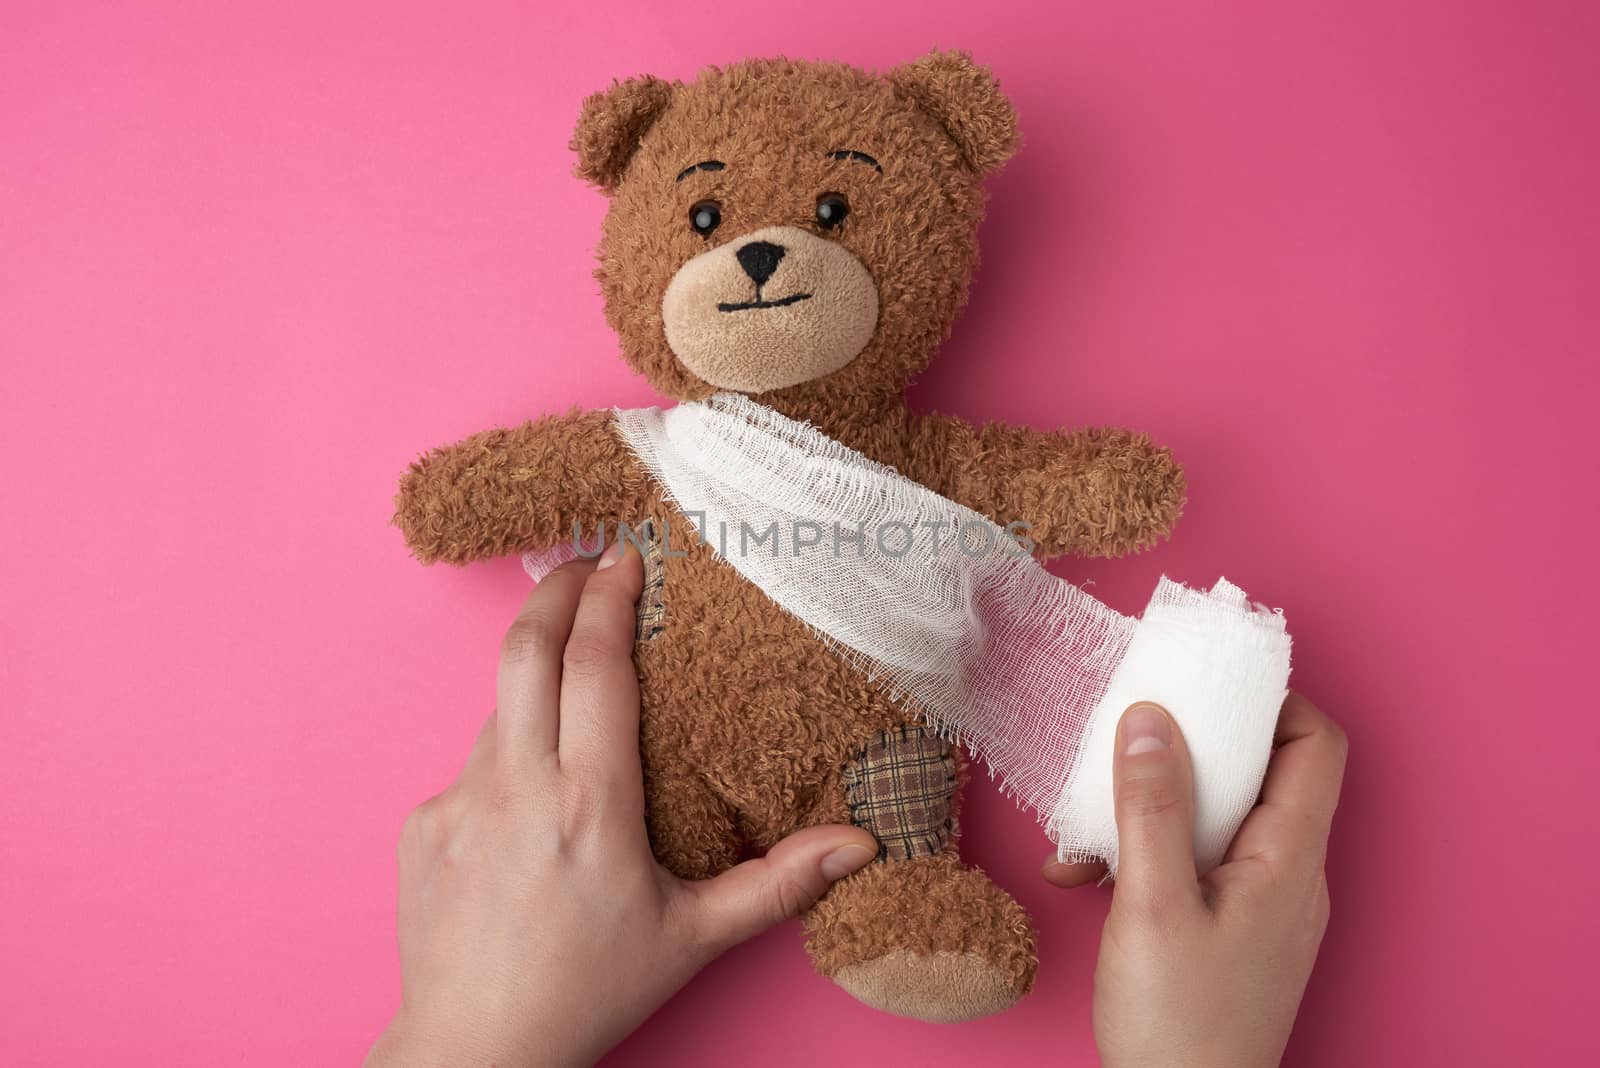 brown teddy bear with bandaged torso with white gauze bandage on a pink background, two female hands are holding a toy